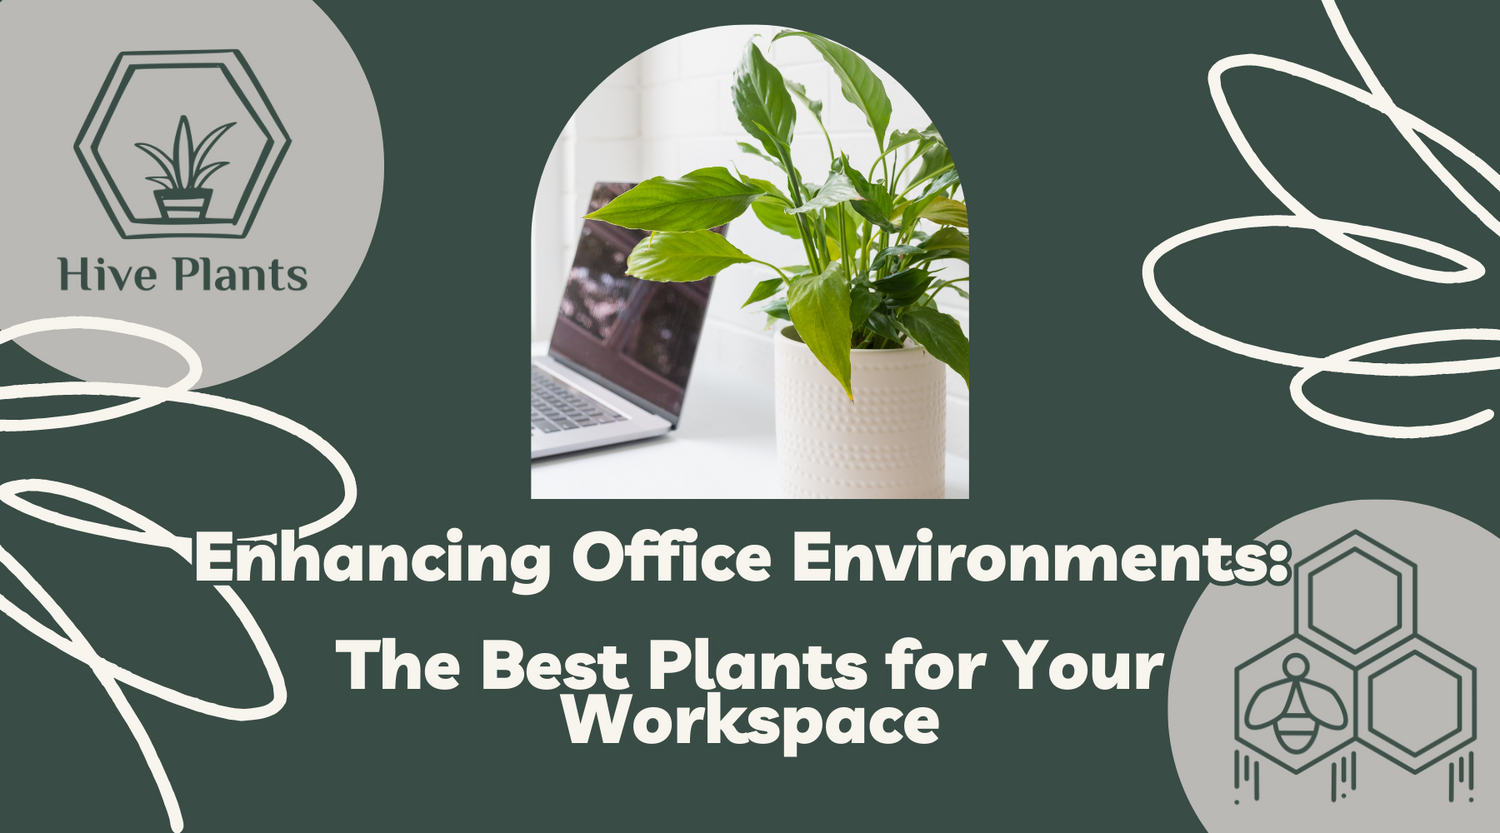 Enhancing Office Environments: The Best Plants for Your Workspace